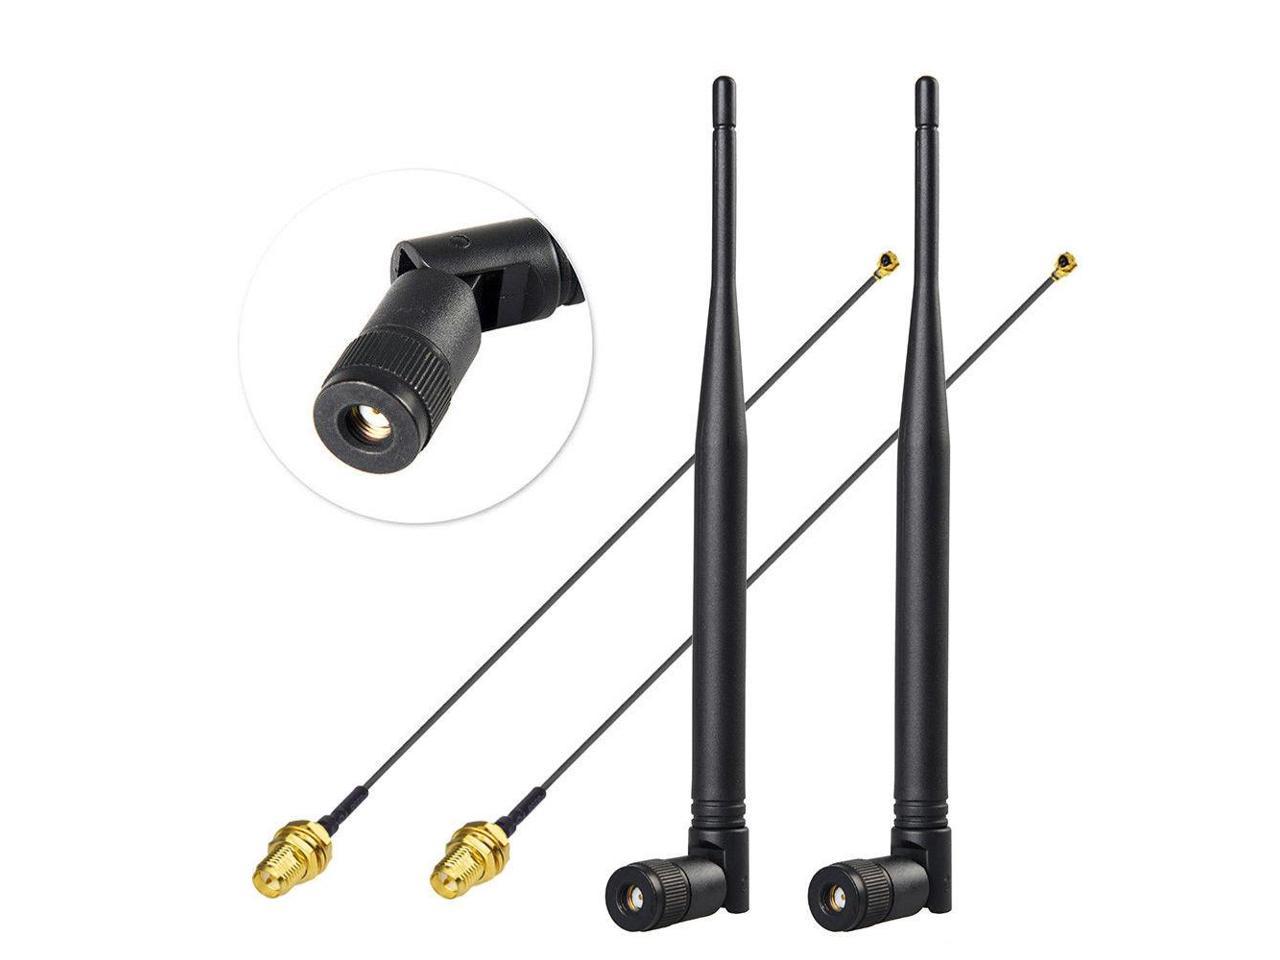 IPEX Cable Antenna Mod Kit 2 12in U.fl 2 9dBi RP-SMA Dual Band 2.4GHz 5GHz 